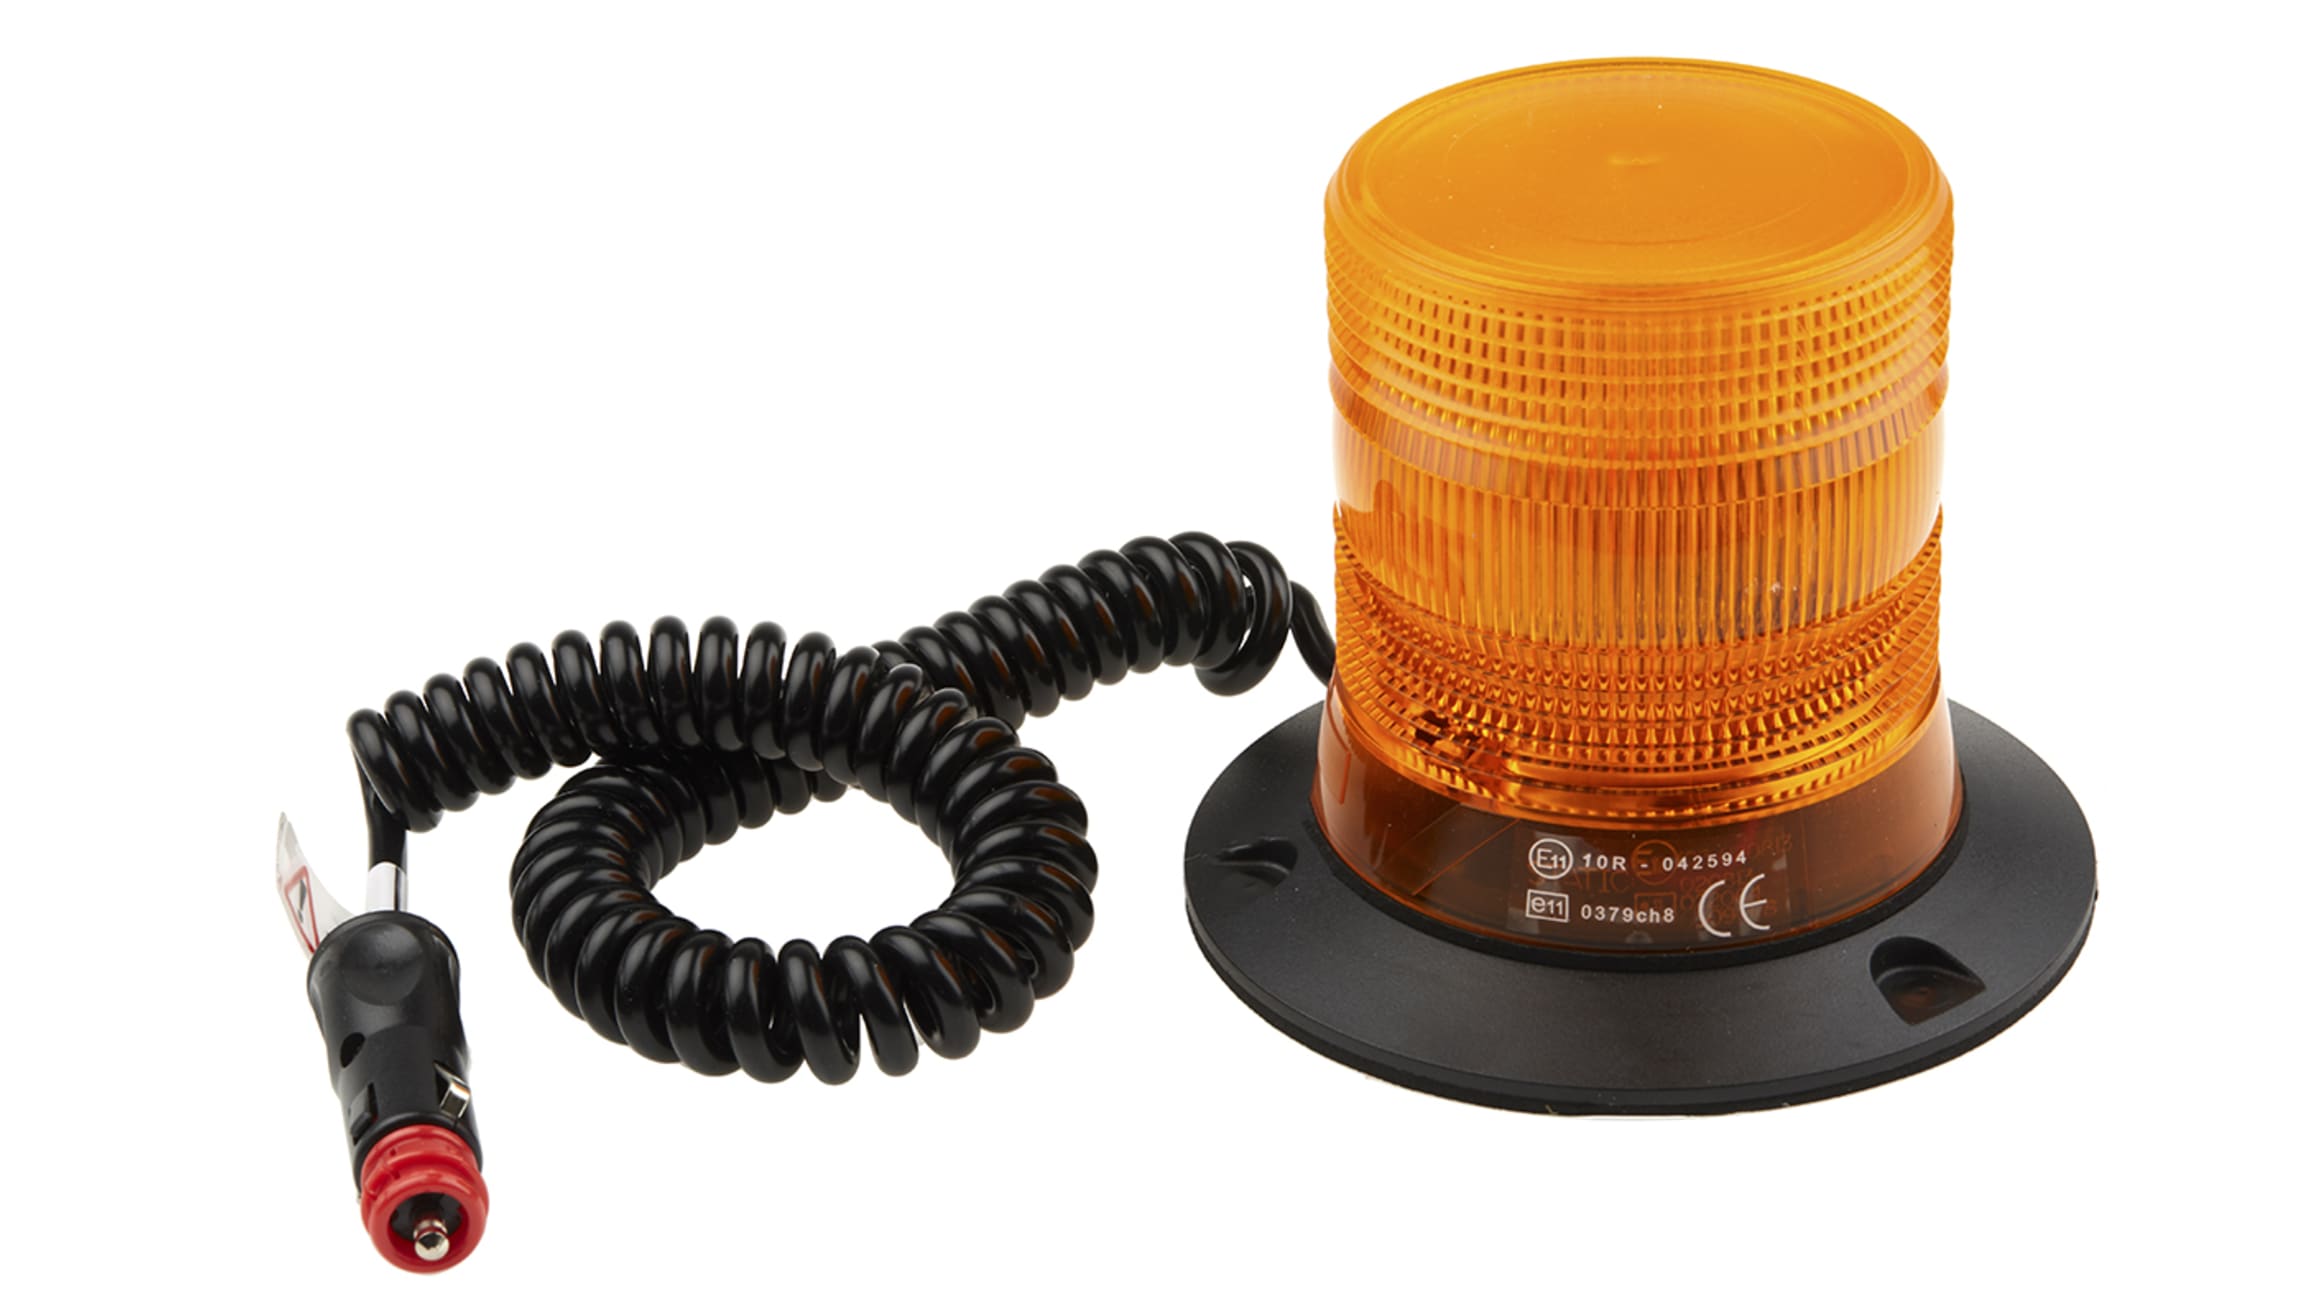 Buy LED beacon with magnetic mounting online